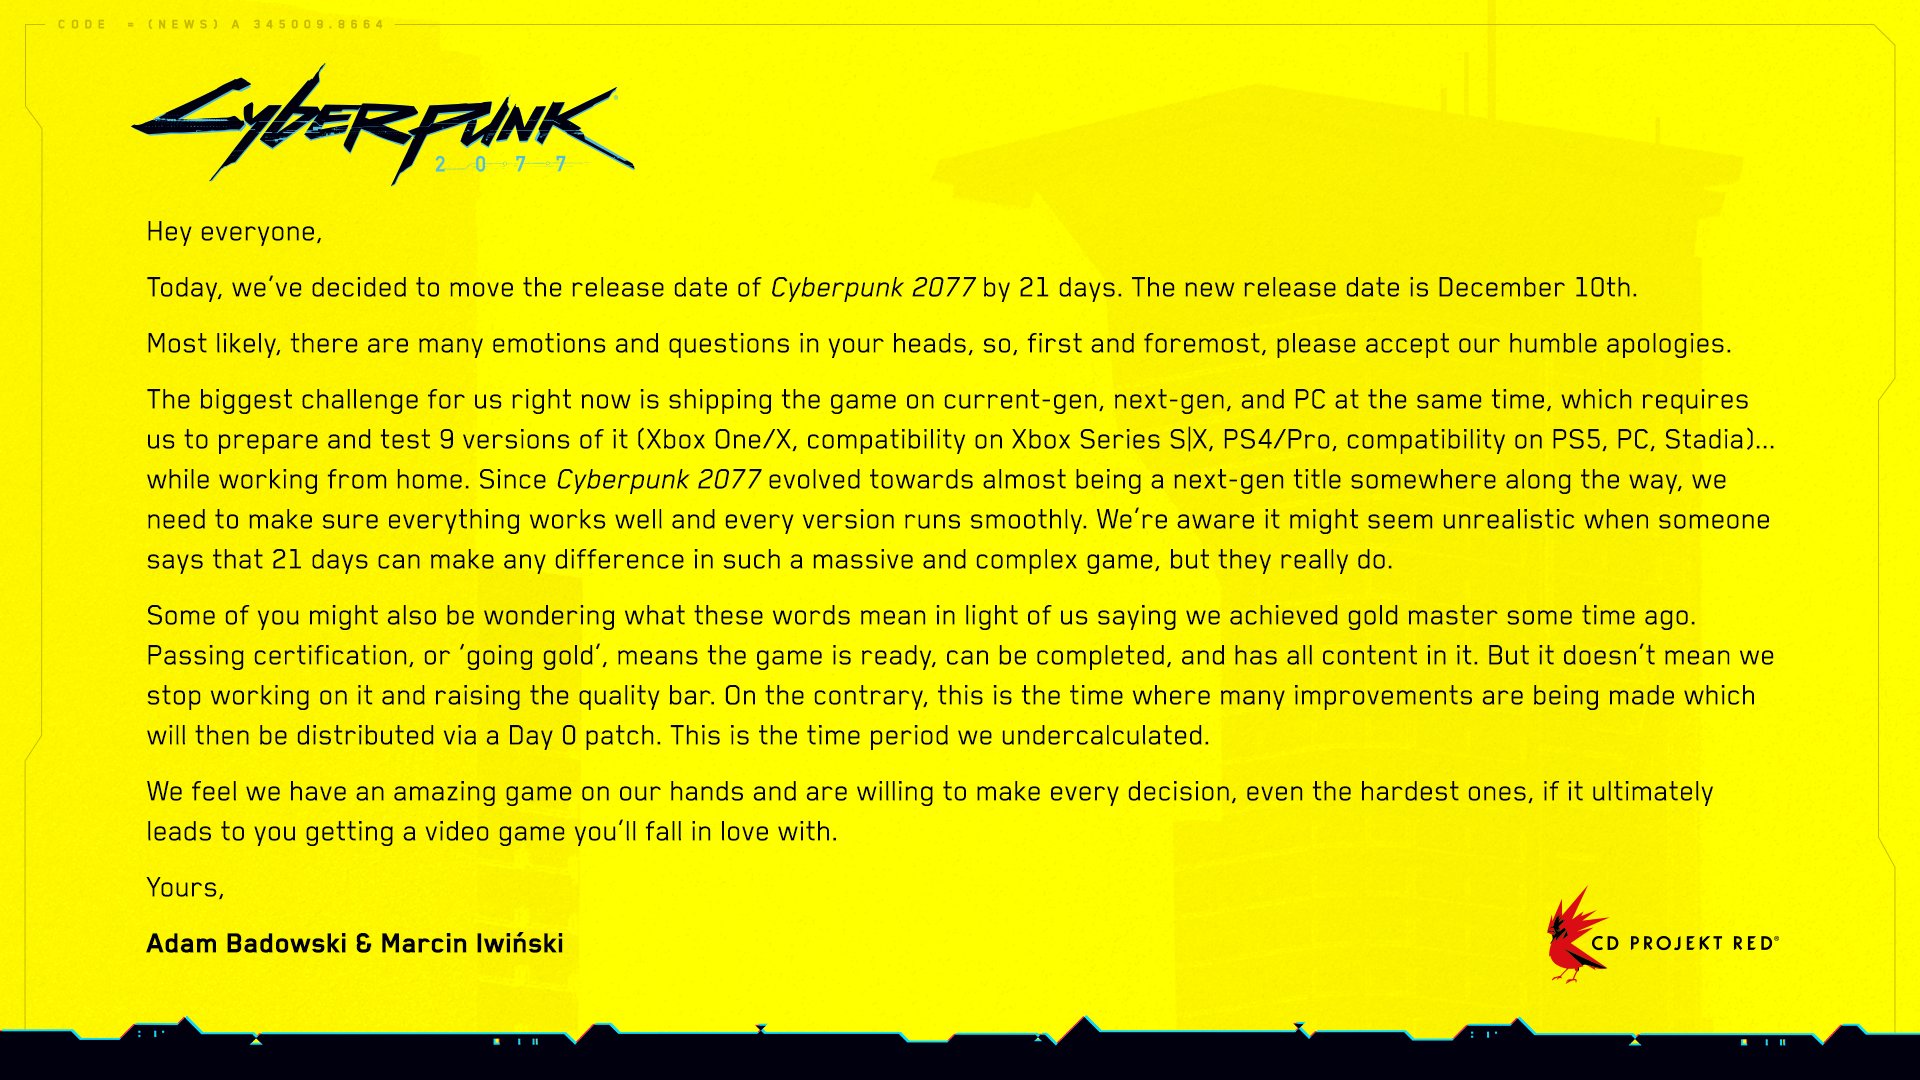 cyberpunk 2077 delay - Cyber Funk Hey everyone, Today, we've decided to move the release date of Cyberpunk 2077 by 21 days. The new release date is December 10th. Most ly, there are many emotions and questions in your heads, s